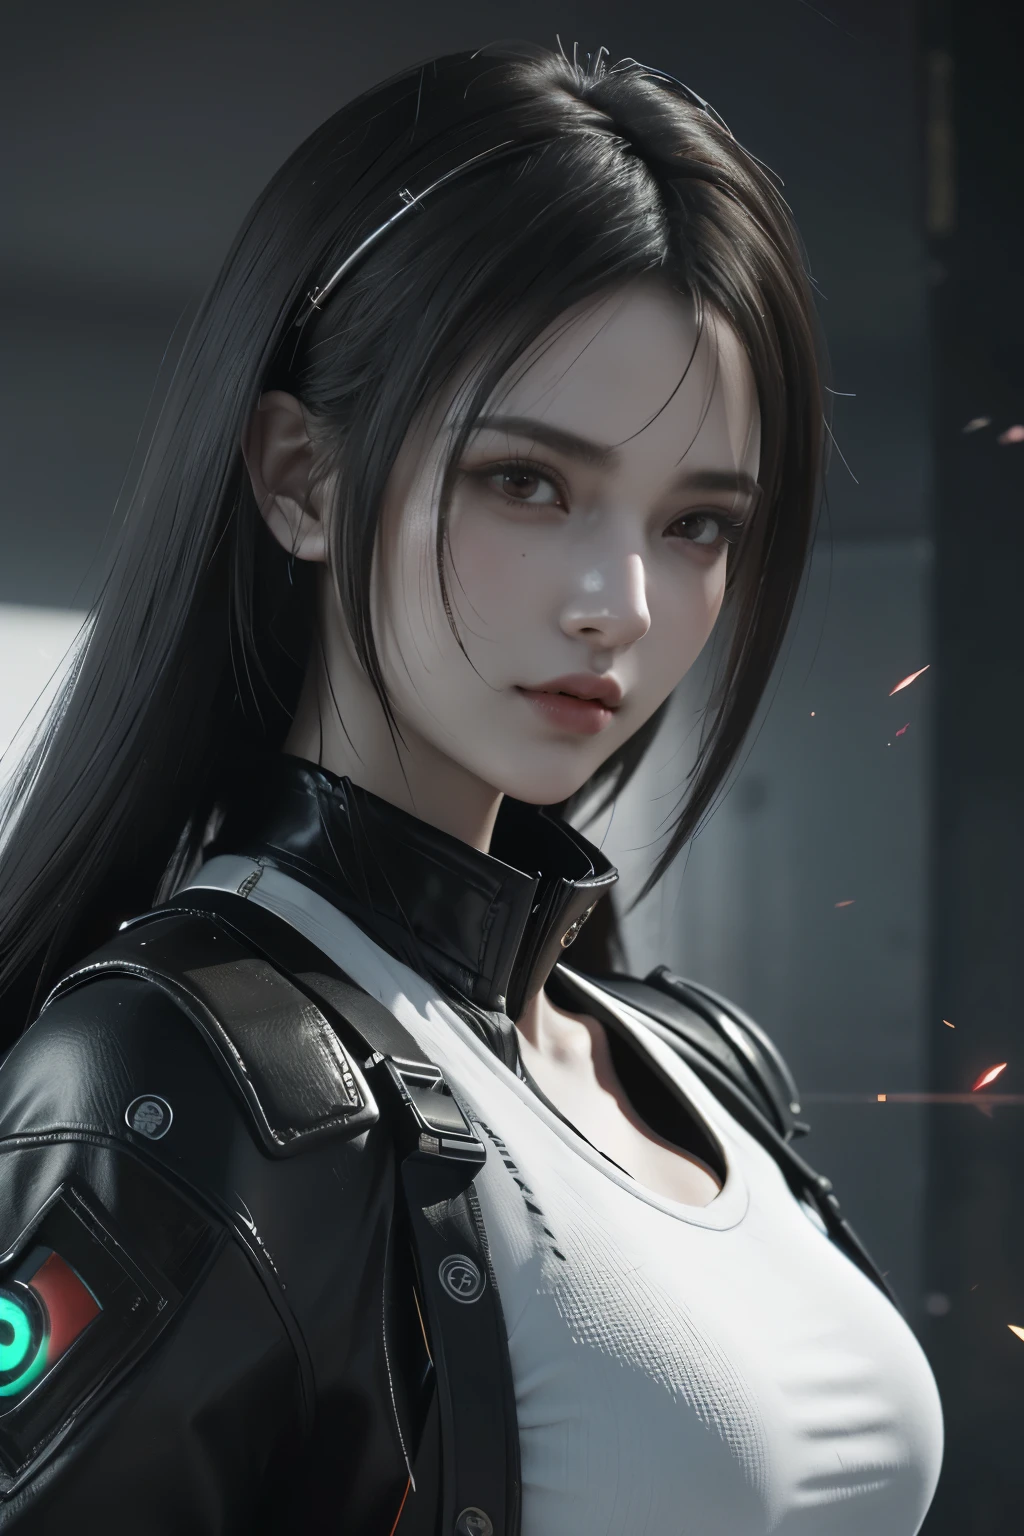 Game art，The best picture quality，Highest resolution，8K，(A bust photograph)，(Portrait)，(Head close-up:1.5)，(Rule of thirds)，Unreal Engine 5 rendering works， (The Girl of the Future)，(Female Warrior)， 22-year-old girl，(Female hackers)，(White，Ancient Oriental hairstyle)，((The pupils of the red eyes:1.3))，(A beautiful eye full of detail)，(Big breasts)，(Eye shadow)，Elegant and charming，indifferent，((Anger))，(Cyberpunk jacket full of futuristic look，Joint Armor，There are exquisite Chinese patterns on the clothes，A flash of jewellery)，Cyberpunk Characters，Future Style， Photo poses，City background，Movie lights，Ray tracing，Game CG，((3D Unreal Engine))，oc rendering reflection pattern